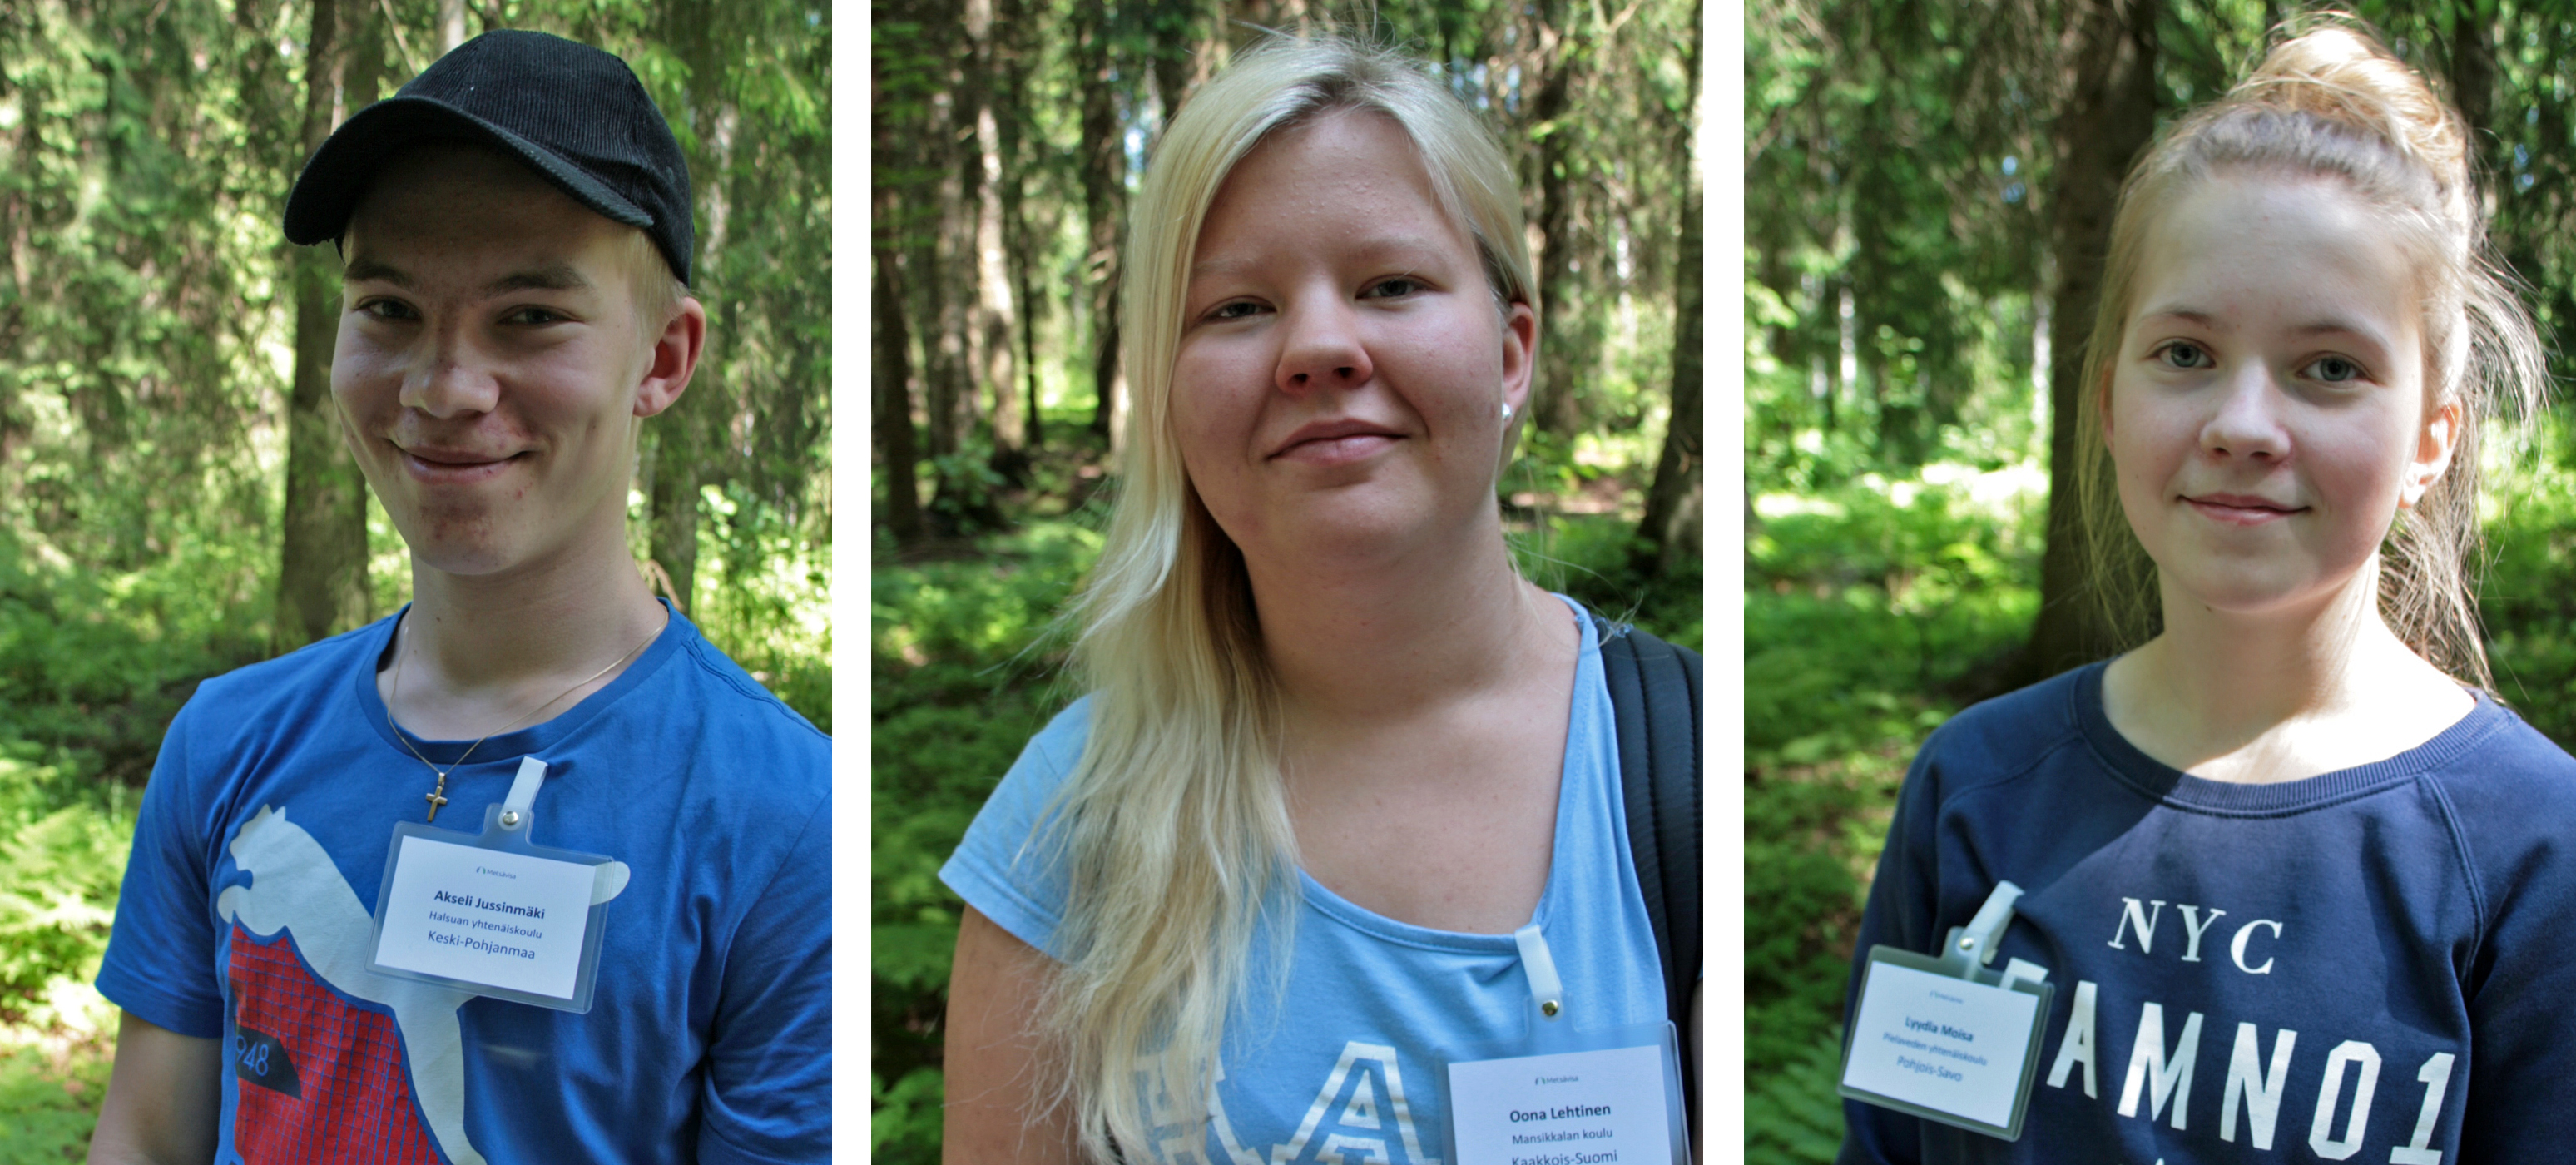 Forest Quiz 2016 winners from left to right: Akseli Jussinmäki, Oona Lehtinen and Lydia Moisa. The rest of the finalists shared the fourth place. Photo: Anna Kauppi